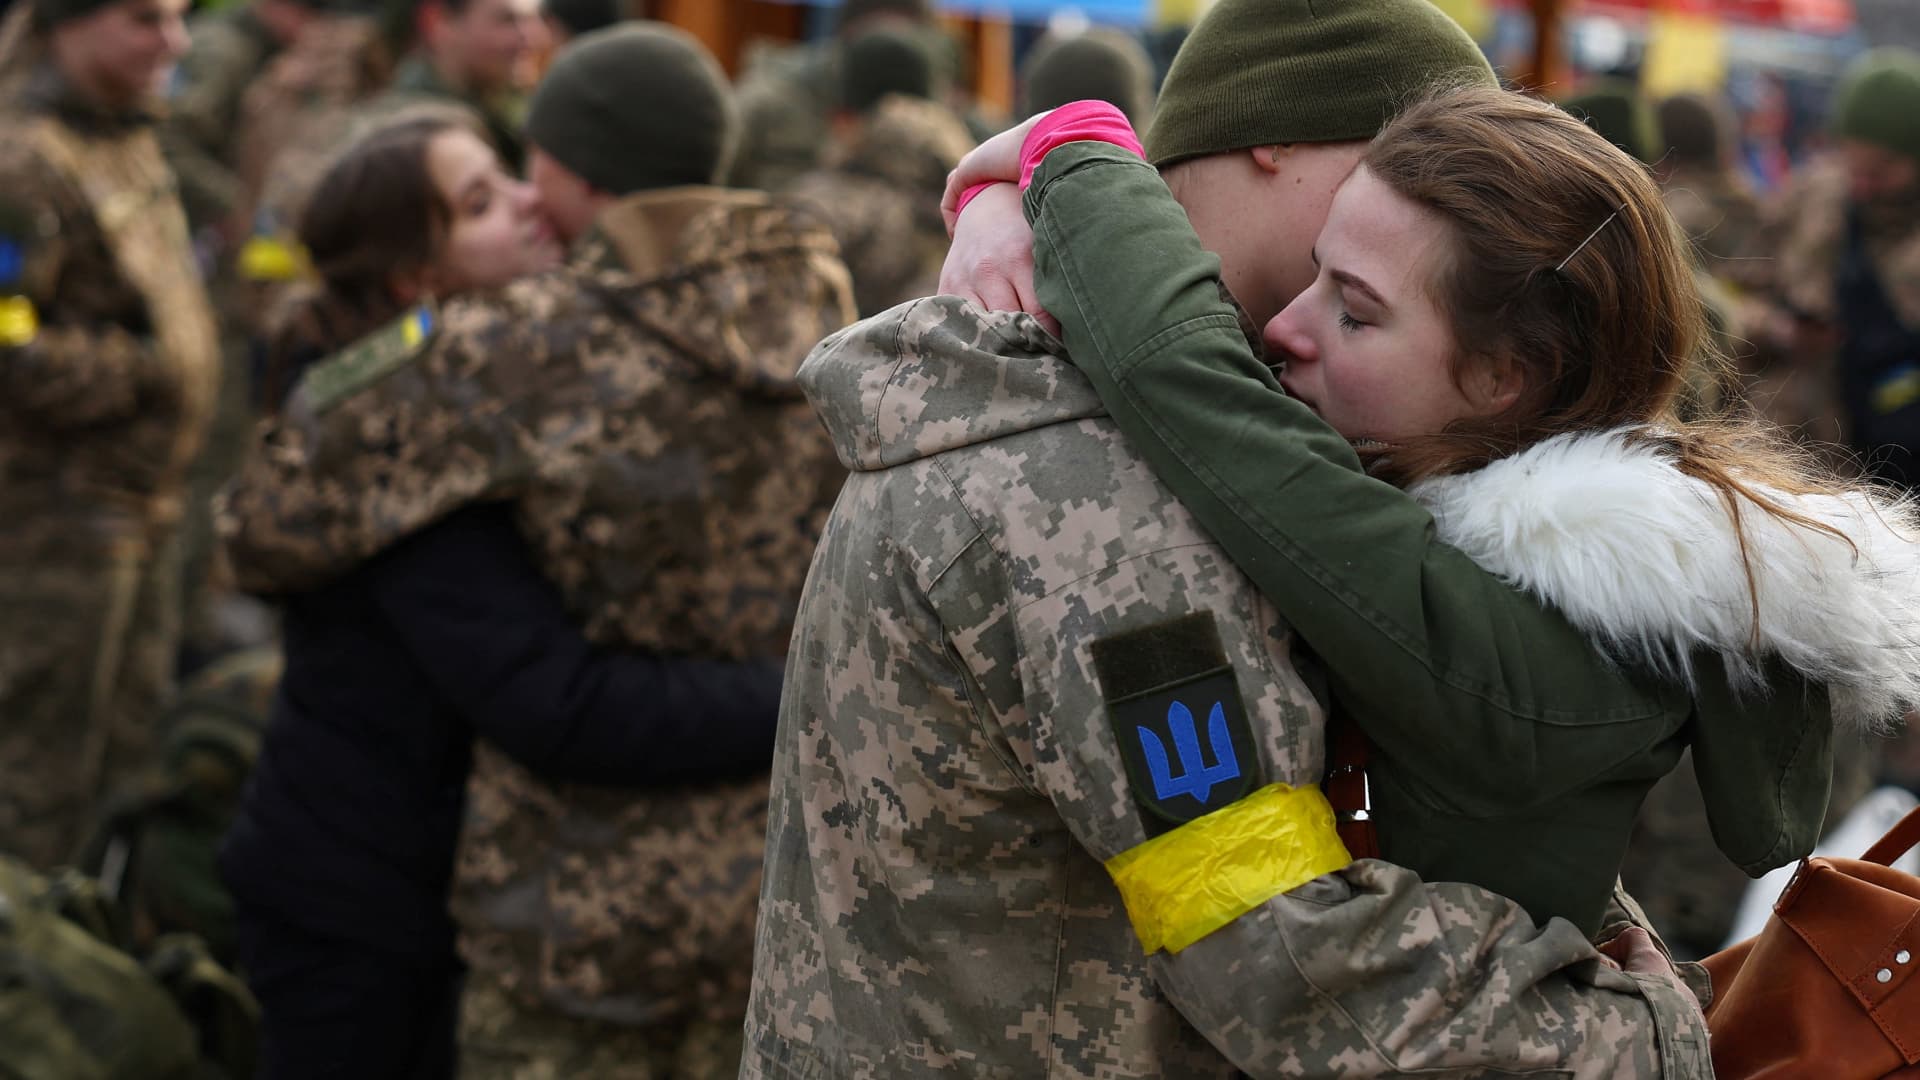 Olga hugs her boyfriend Vlodomyr as they say good bye prior to Vlodomyr's deployment closer to the front line, amid Russia's invasion of Ukraine, at the train station in Lviv, Ukraine, March 9, 2022.